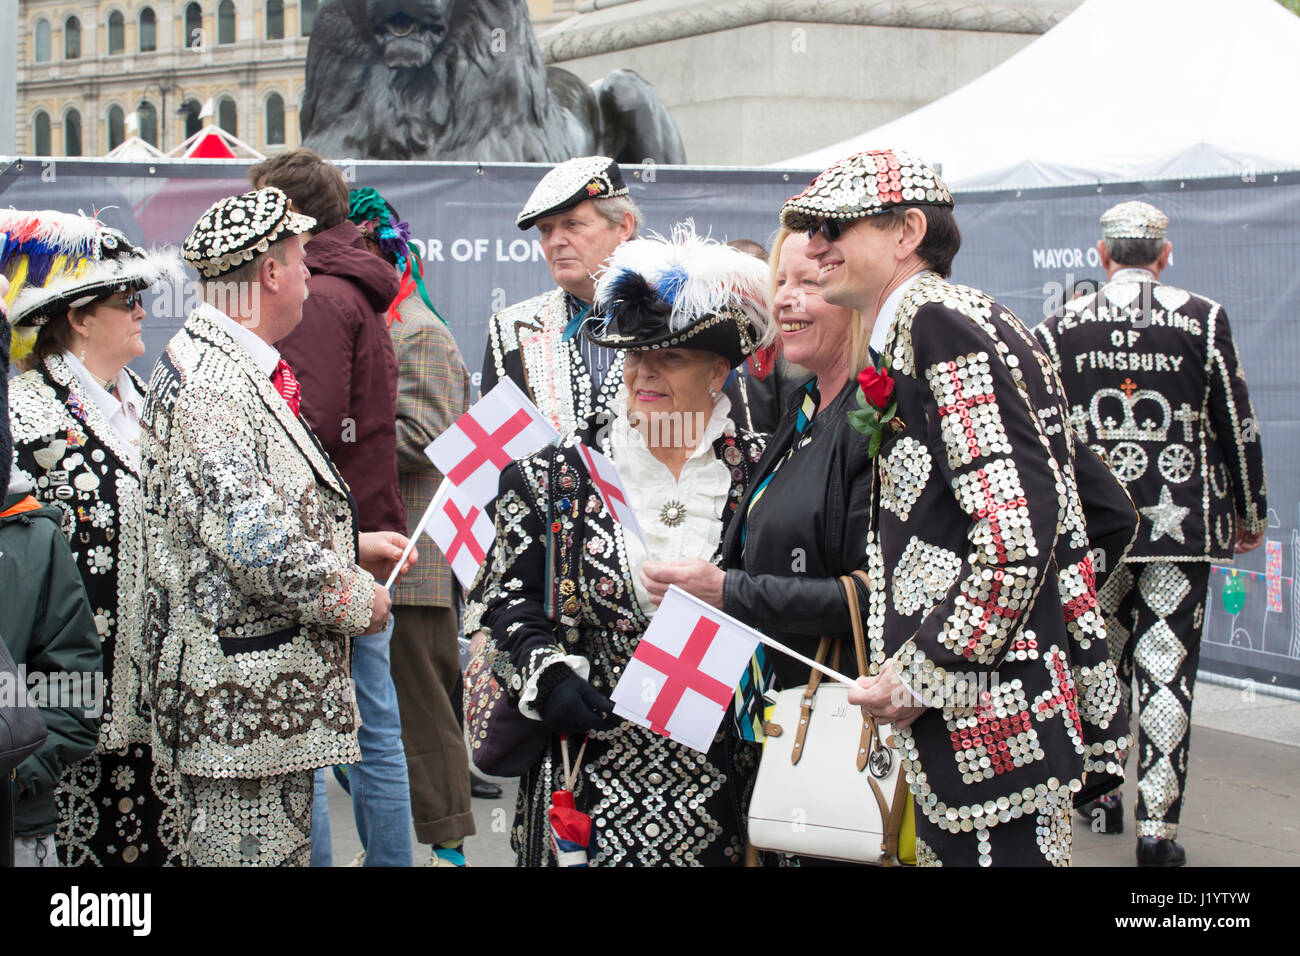 London, UK. 22nd April, 2017. St George's Day 2017 celebrations in Trafalgar Square in London, England United Kingdom. The annual free event was organised by the Mayor of London and attracted a huge crowd celebrating the Patron Saint of England. Some people in the crowd were very colourful and some wore costumes for the joy of children and adults. The pearly Kings and Queens of various parts of London were also present at the celebrations. Credit: Chris Pig Photography/Alamy Live News Stock Photo